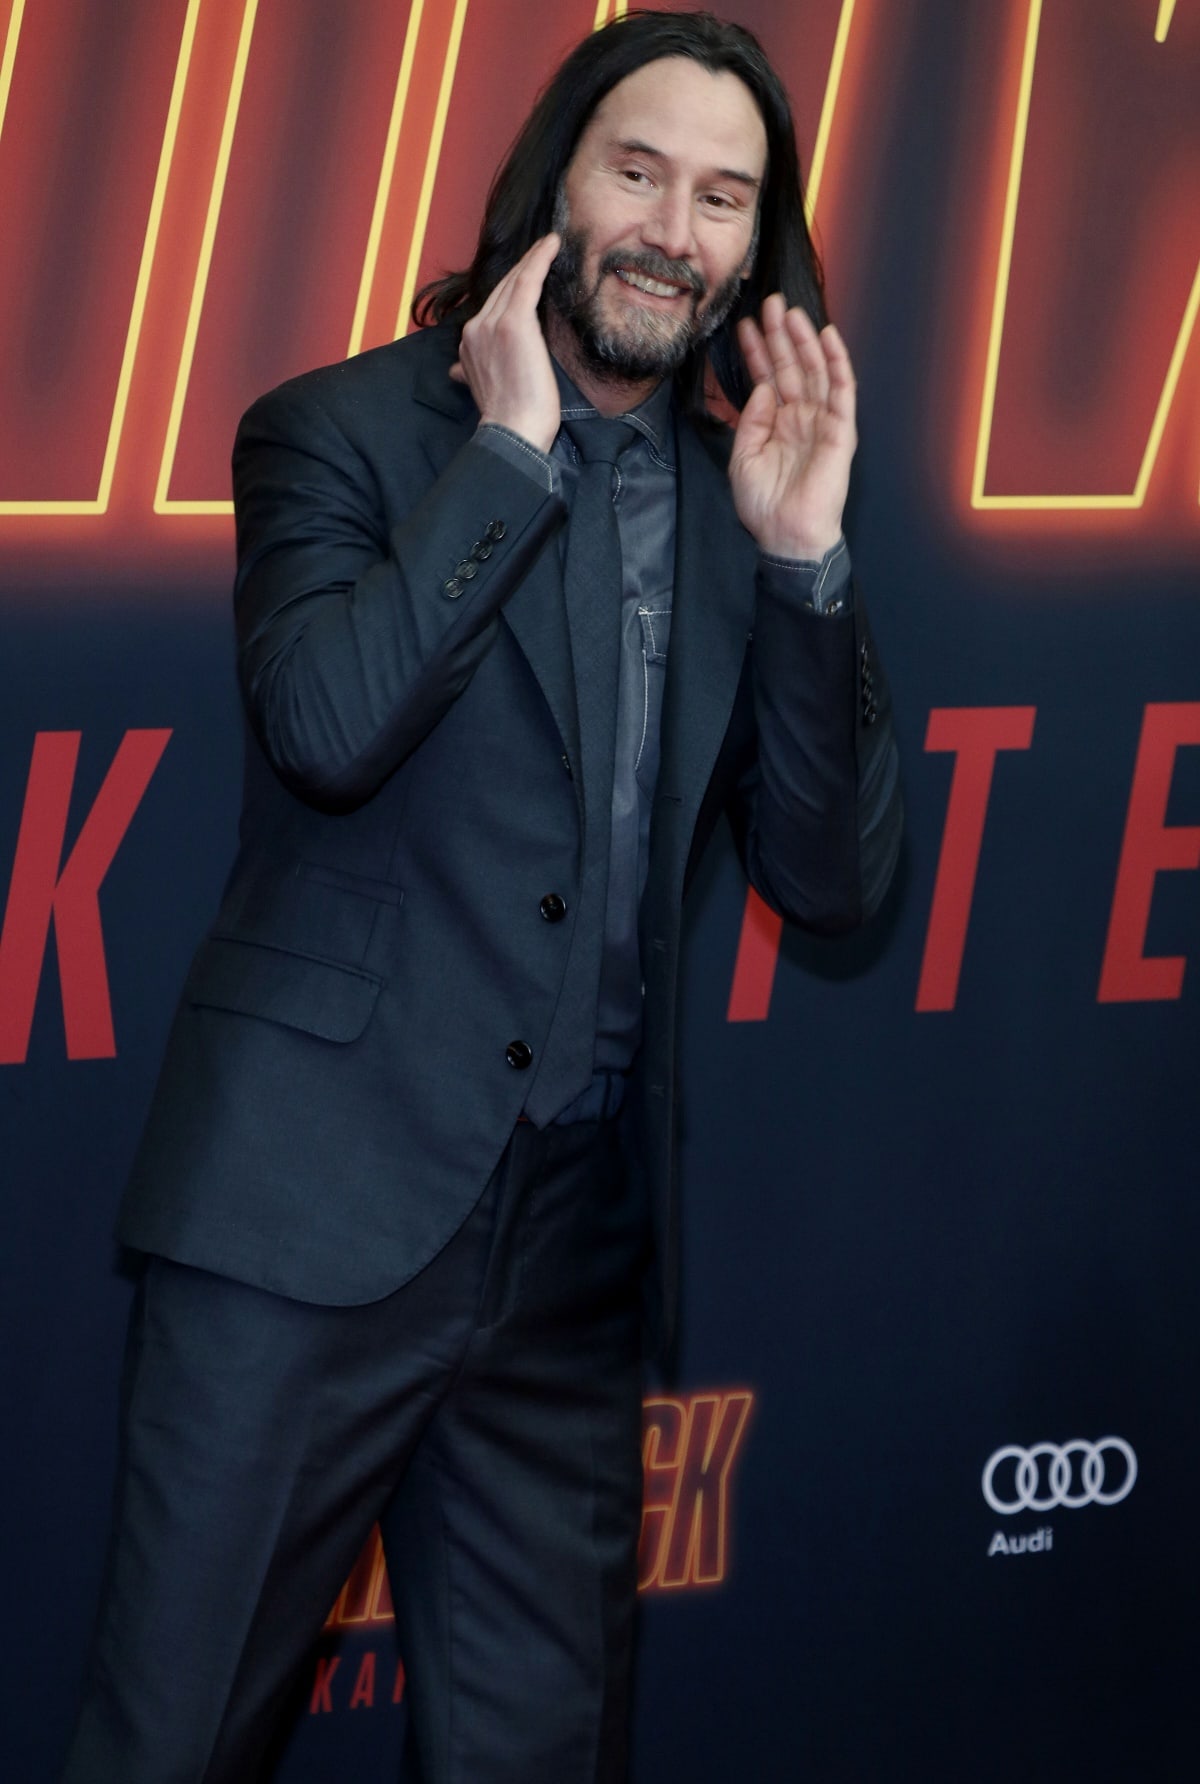 Keanu Reeves greeting fans at the premiere of John Wick: Chapter 4 in Berlin